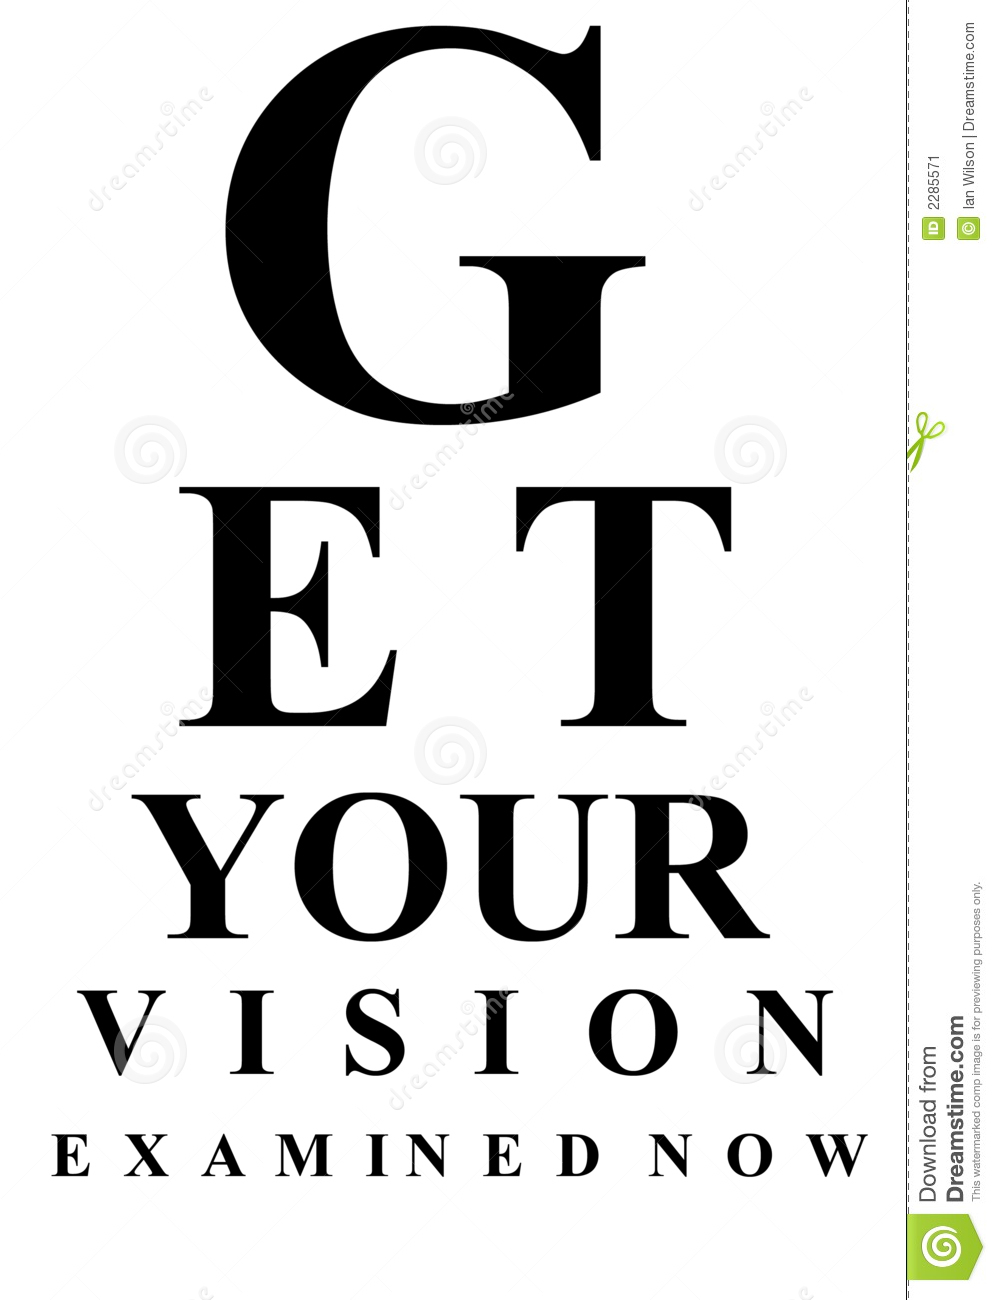 An Eye Test Chart Spelling Out The Message Get Your Vision Examined